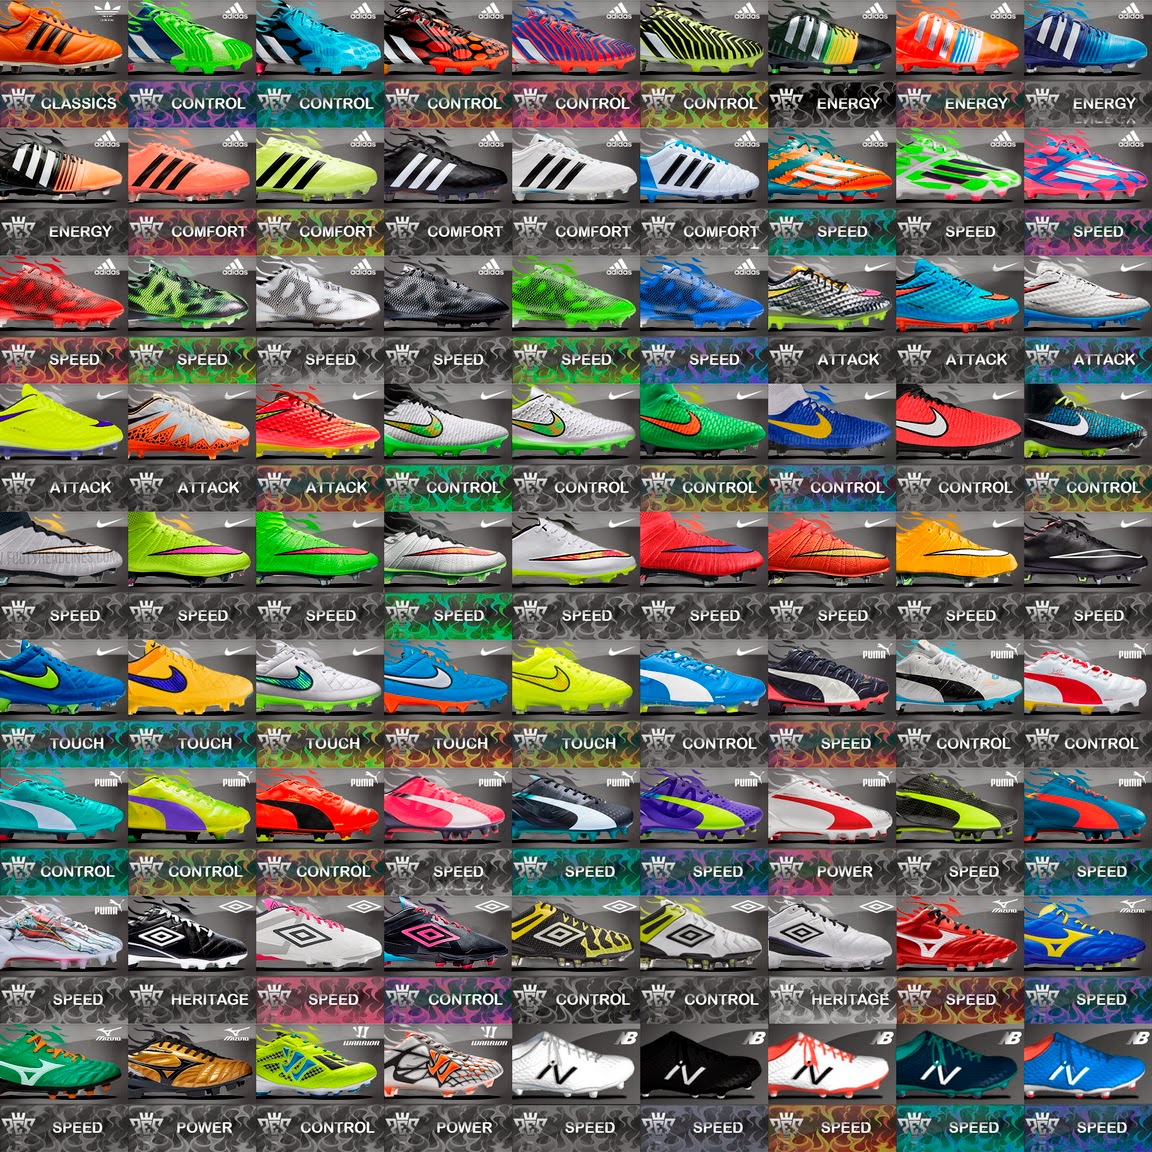 PES 2013 Actual Collection of Boots v.1 by digga